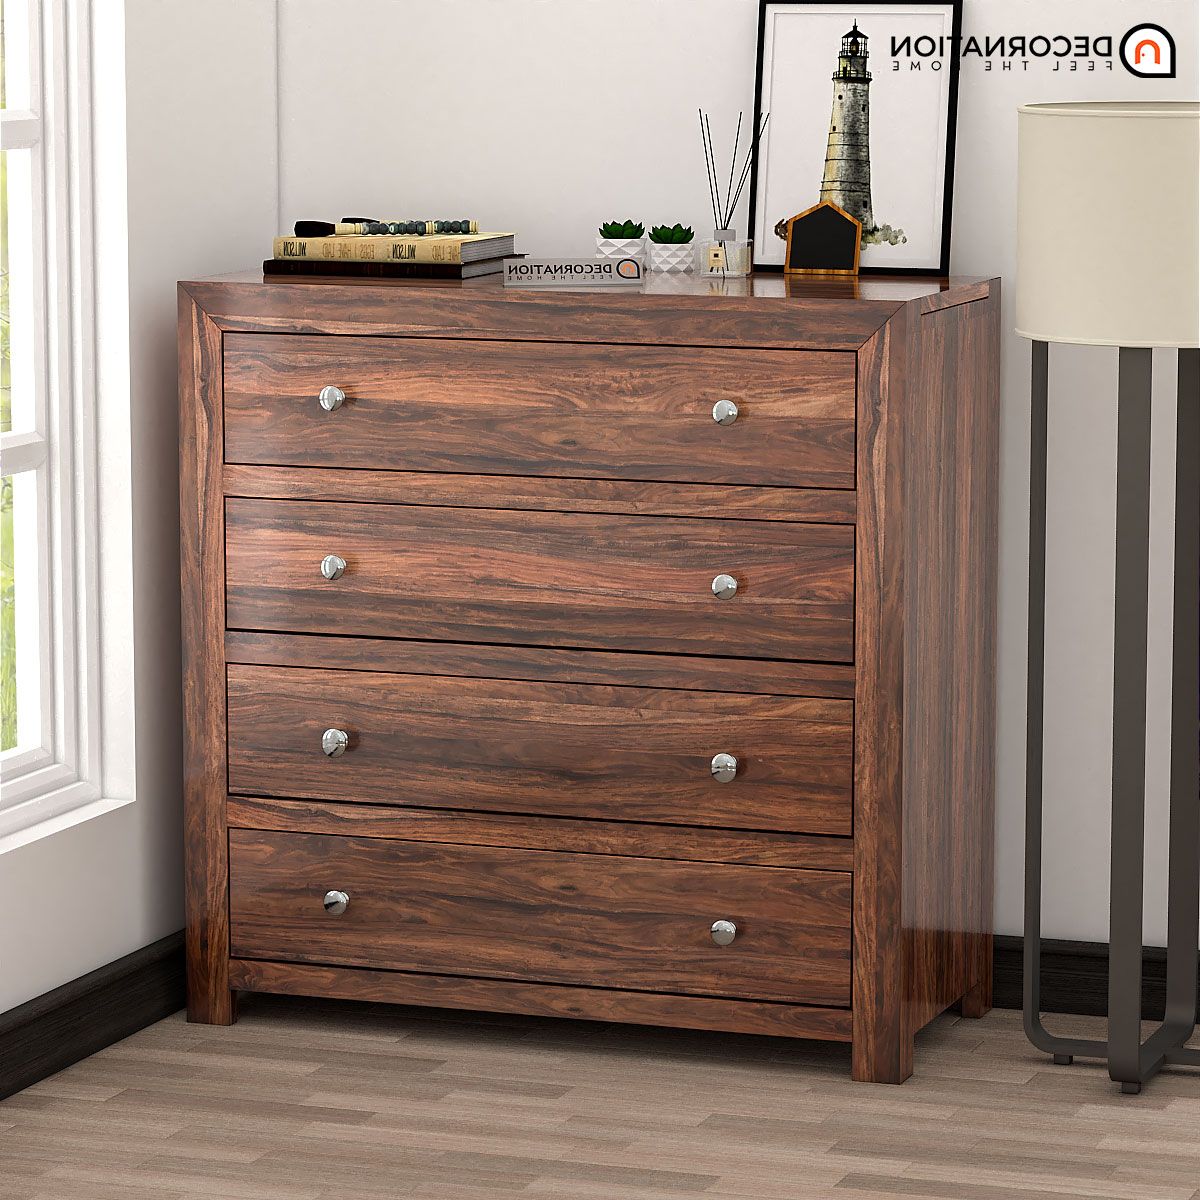 Caesar Wooden Drawer Storage Cabinet – Brown – Decornation Intended For Wood Cabinet With Drawers (Gallery 1 of 20)